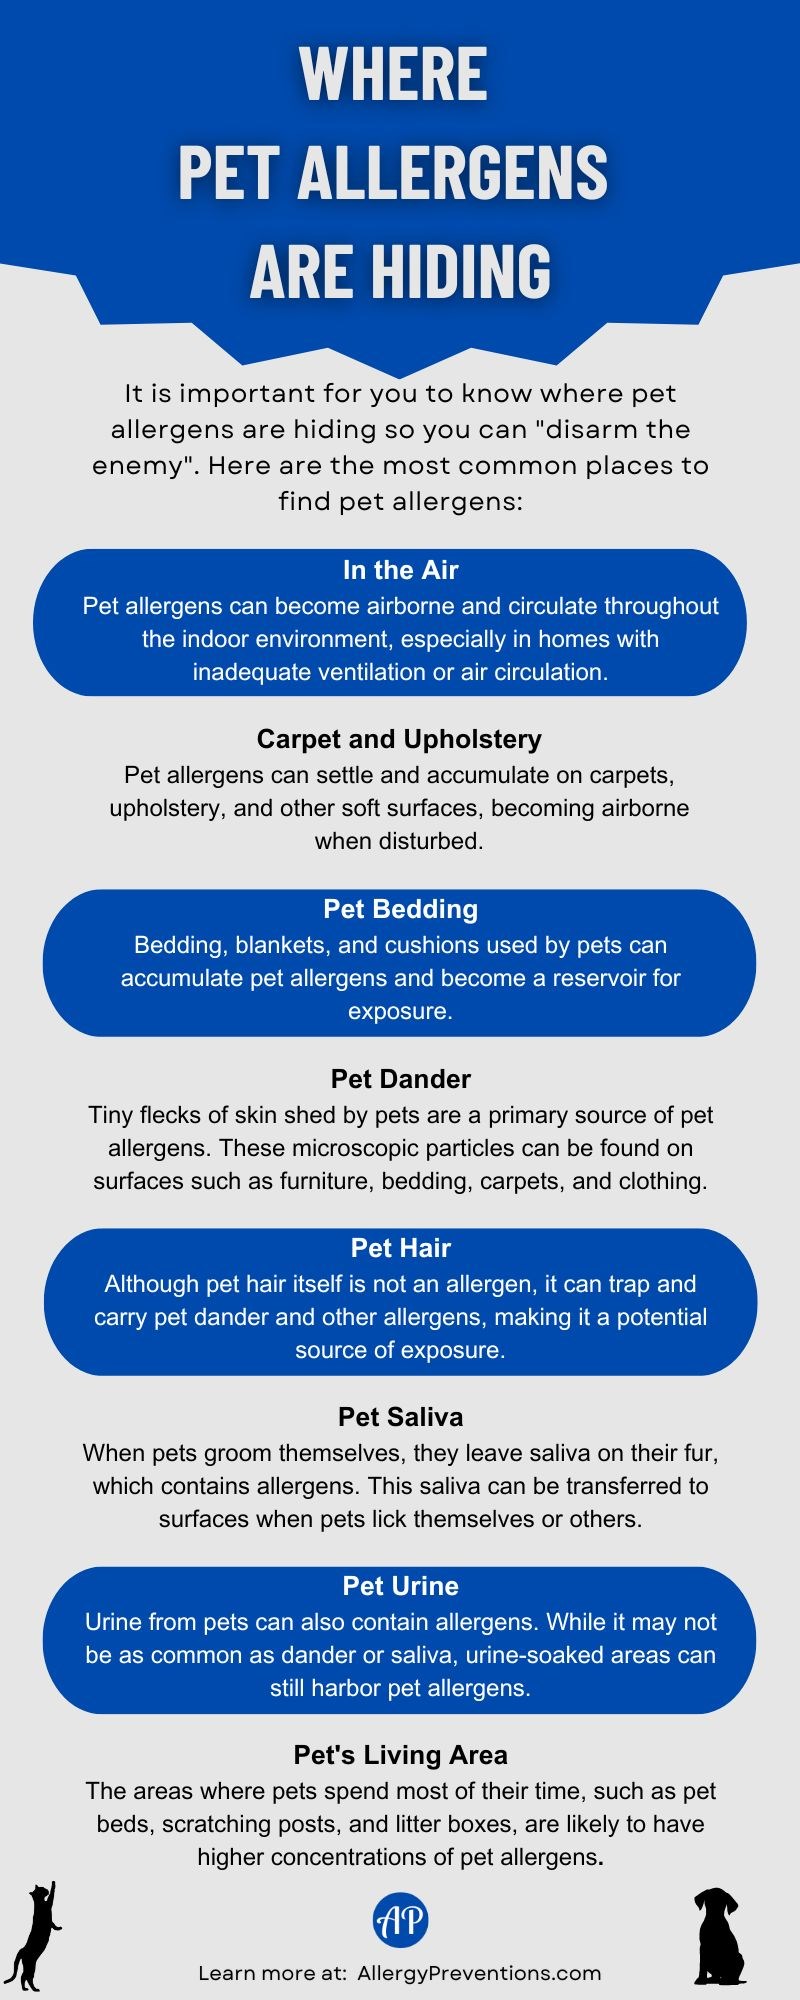 Where pet allergens are hiding infographic: It is important for you to know where pet allergens are hiding so you can "disarm the enemy". Here are the most common places to find pet allergens: In the Air Pet allergens can become airborne and circulate throughout the indoor environment, especially in homes with inadequate ventilation or air circulation. Carpet and Upholstery Pet allergens can settle and accumulate on carpets, upholstery, and other soft surfaces, becoming airborne when disturbed. Pet Bedding Bedding, blankets, and cushions used by pets can accumulate pet allergens and become a reservoir for exposure. Pet Dander Tiny flecks of skin shed by pets are a primary source of pet allergens. These microscopic particles can be found on surfaces such as furniture, bedding, carpets, and clothing. Pet Hair Although pet hair itself is not an allergen, it can trap and carry pet dander and other allergens, making it a potential source of exposure. Pet Saliva When pets groom themselves, they leave saliva on their fur, which contains allergens. This saliva can be transferred to surfaces when pets lick themselves or others. Pet Urine Urine from pets can also contain allergens. While it may not be as common as dander or saliva, urine-soaked areas can still harbor pet allergens. Pet's Living Area The areas where pets spend most of their time, such as pet beds, scratching posts, and litter boxes, are likely to have higher concentrations of pet allergens.